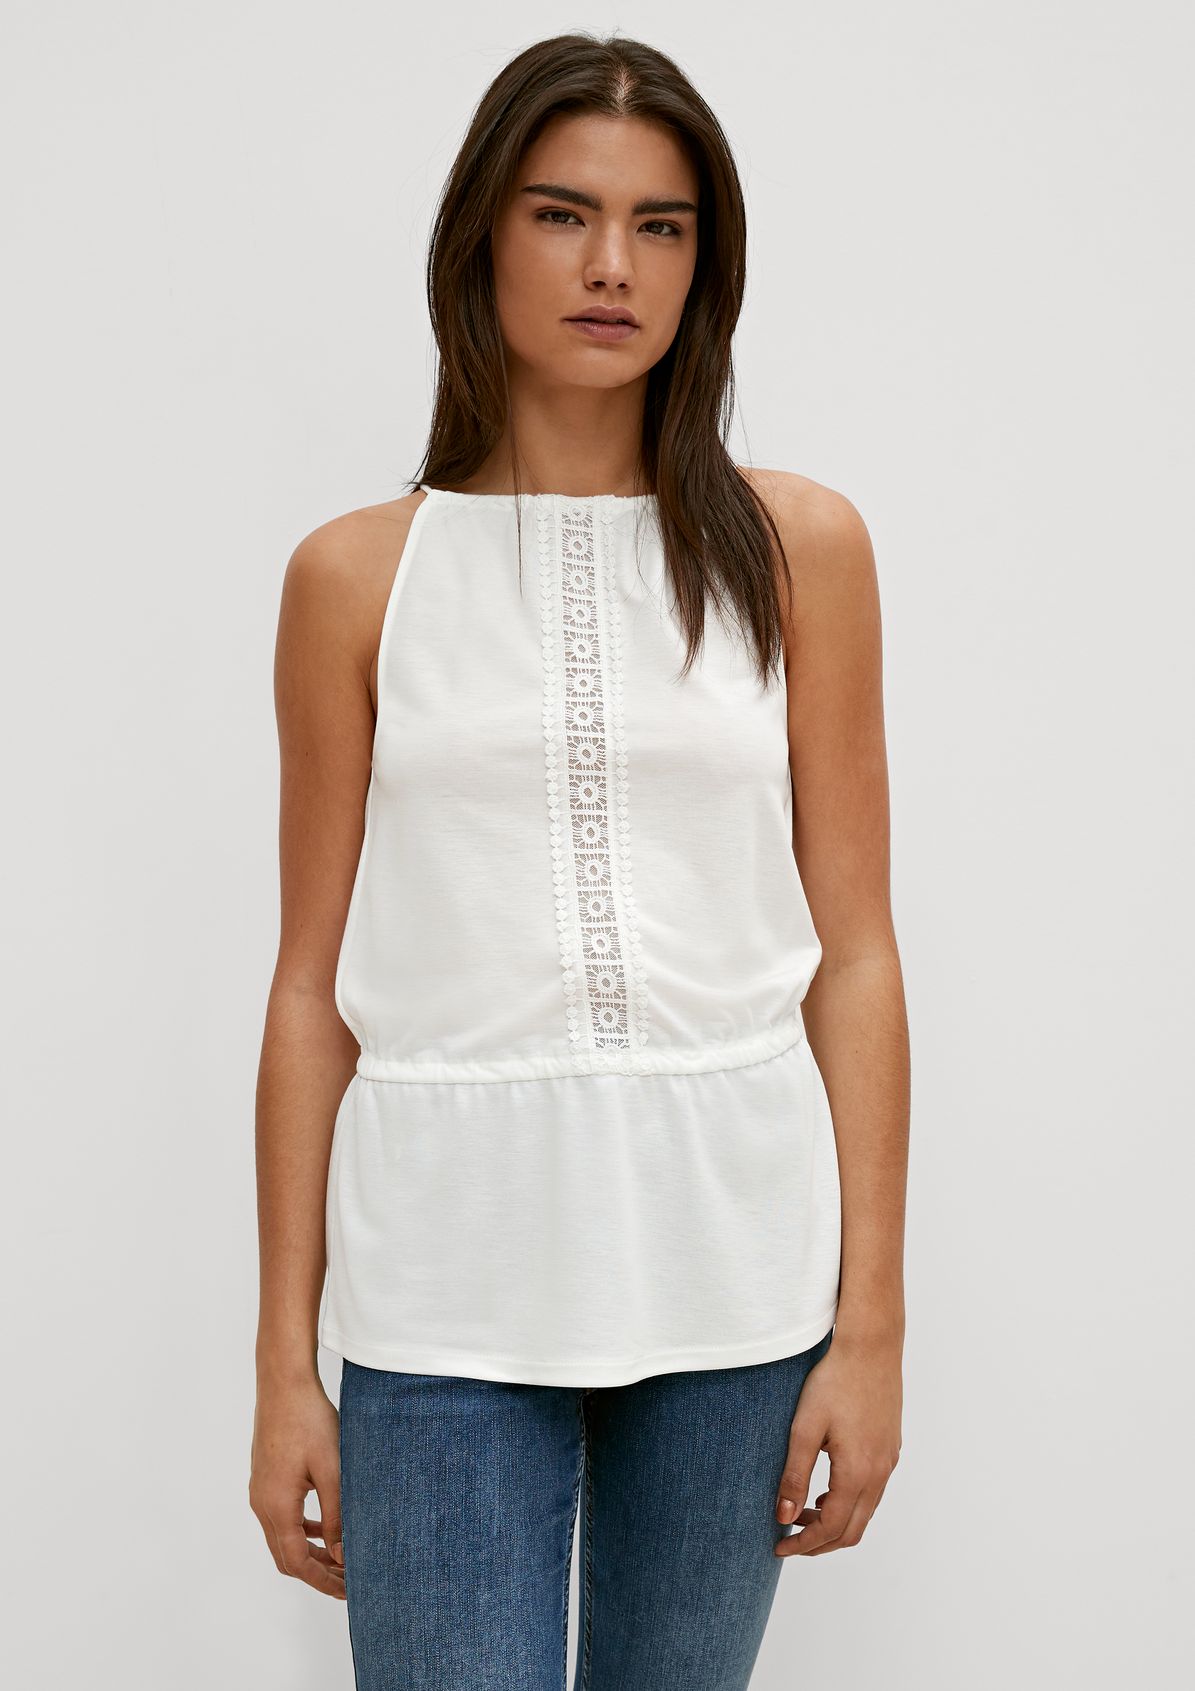 Top with lace details from comma